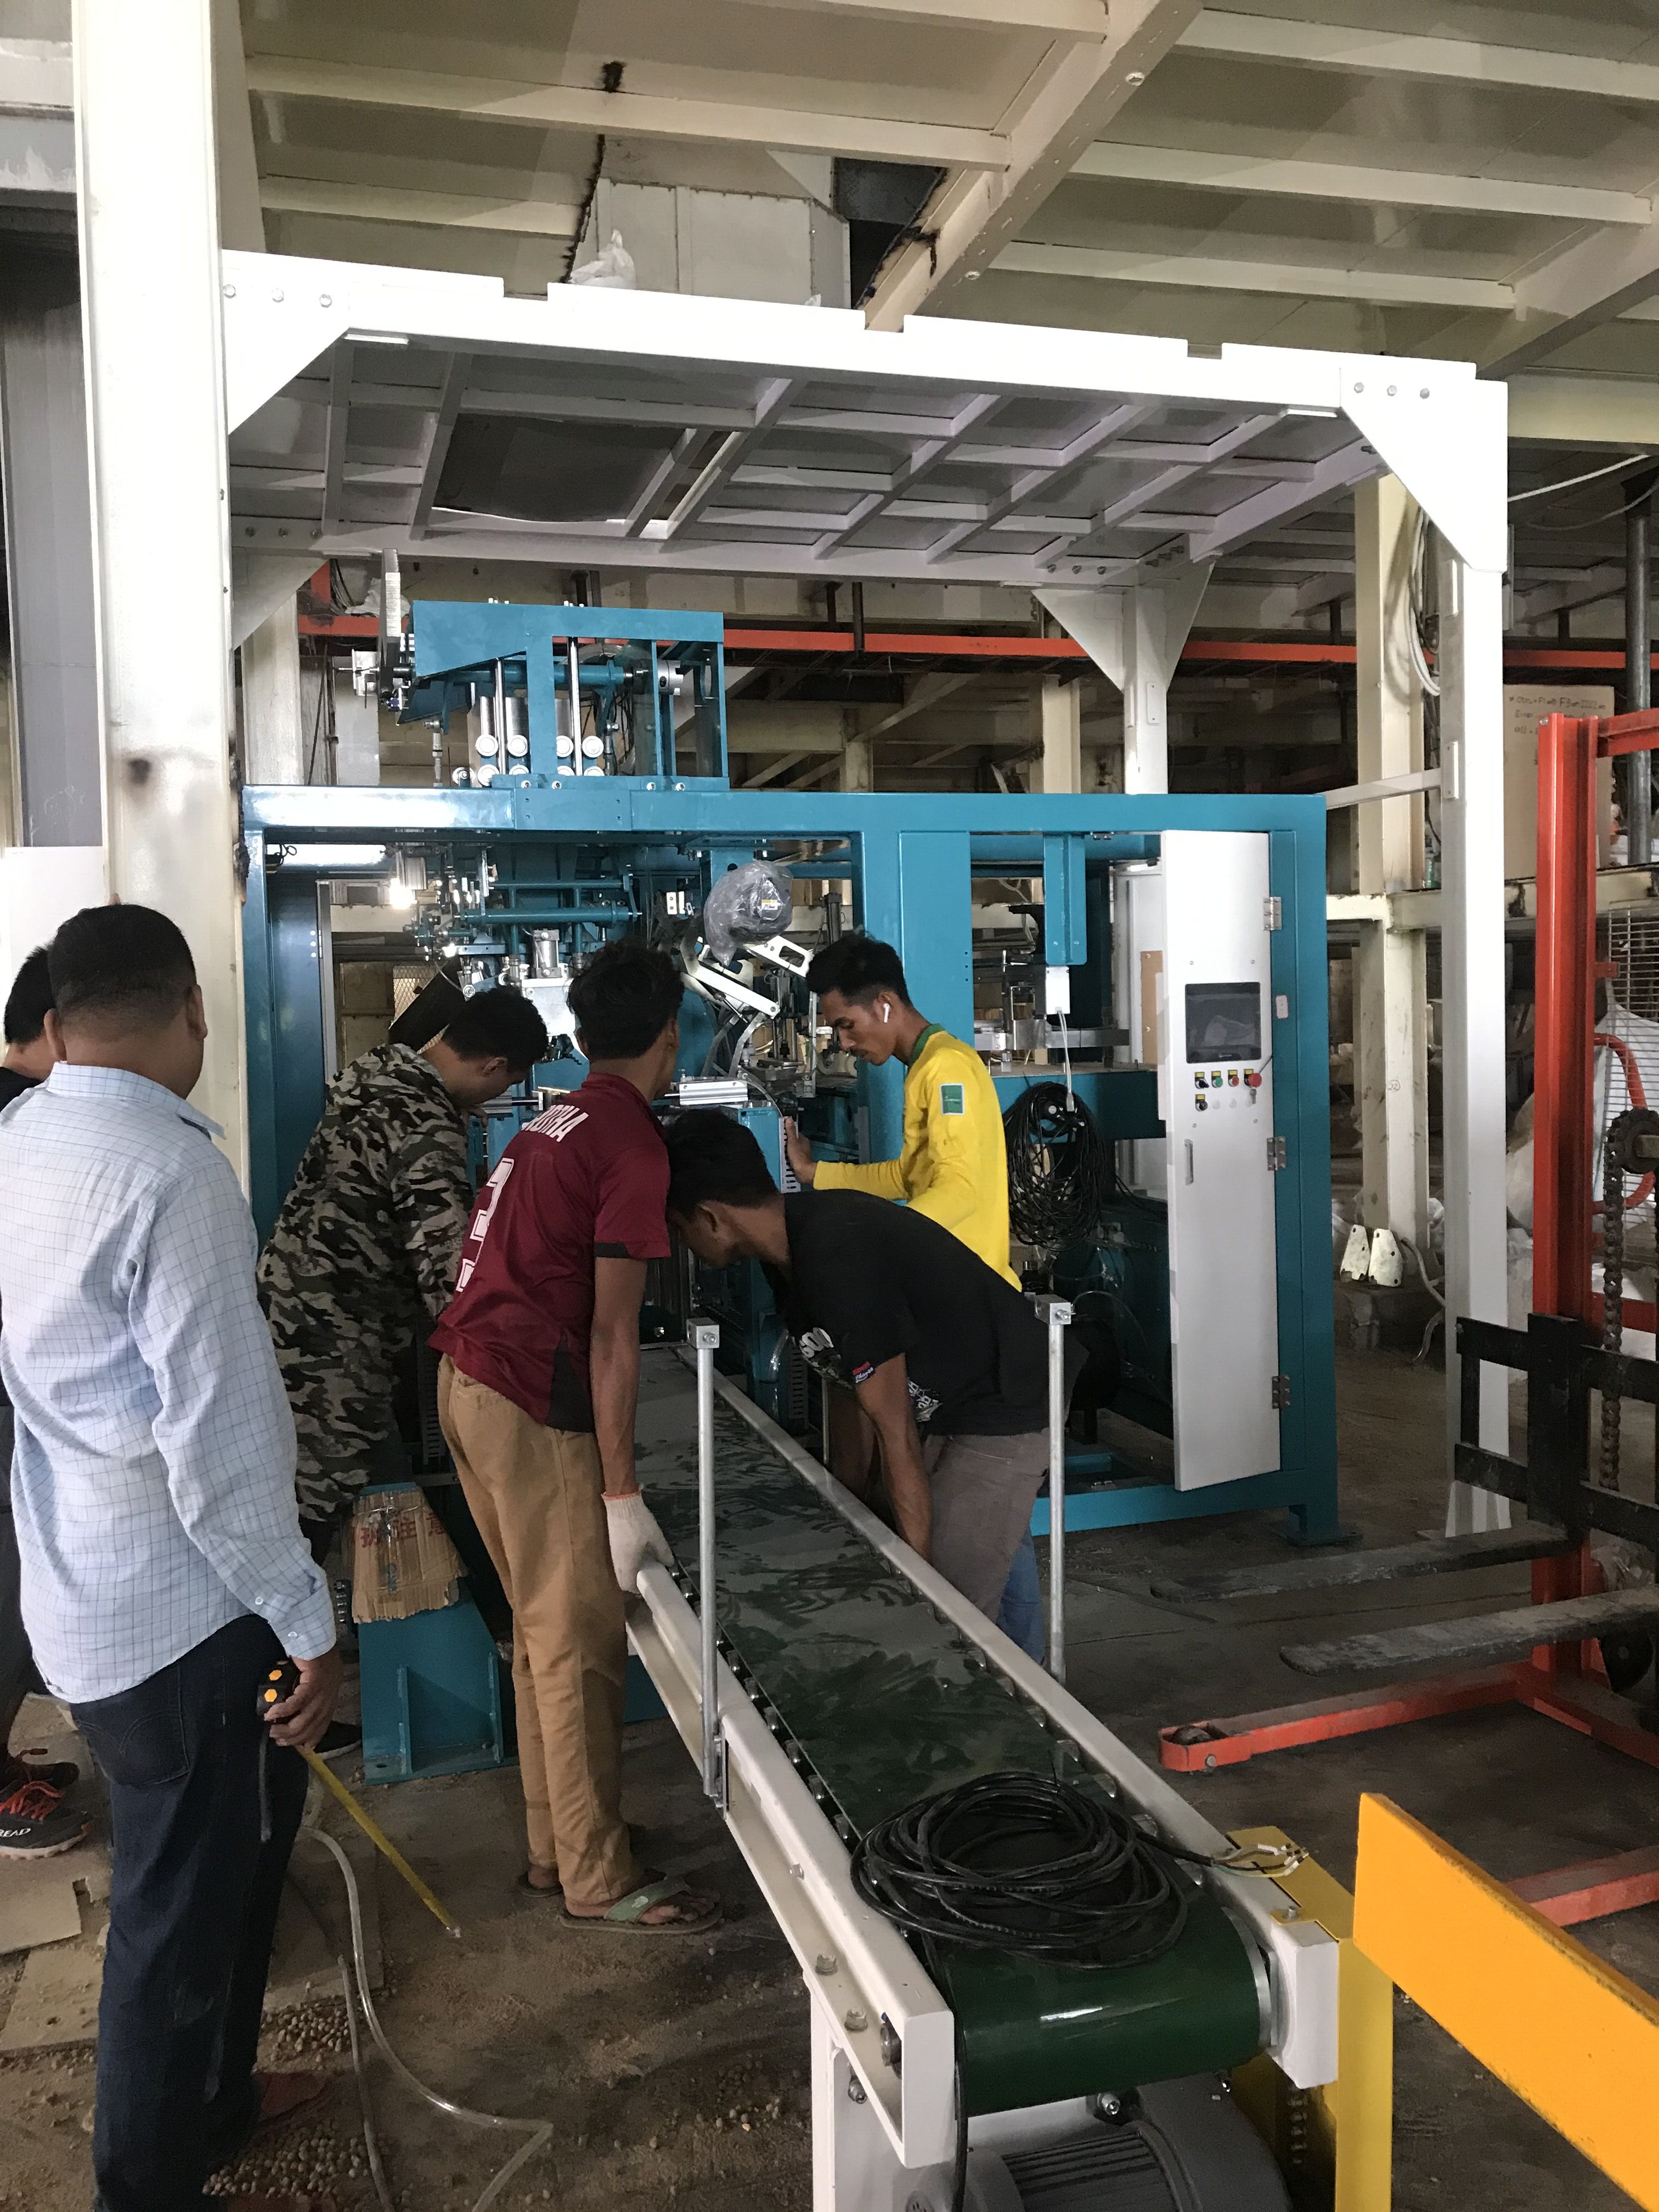 Sulphate Potash bagging machine Automated Bagging Line Fully Automatic Packing Palletizing Line, Fully Automatic Packing Line, Fully Automatic Bagging Line, Fully Automatic filling and packaging line,